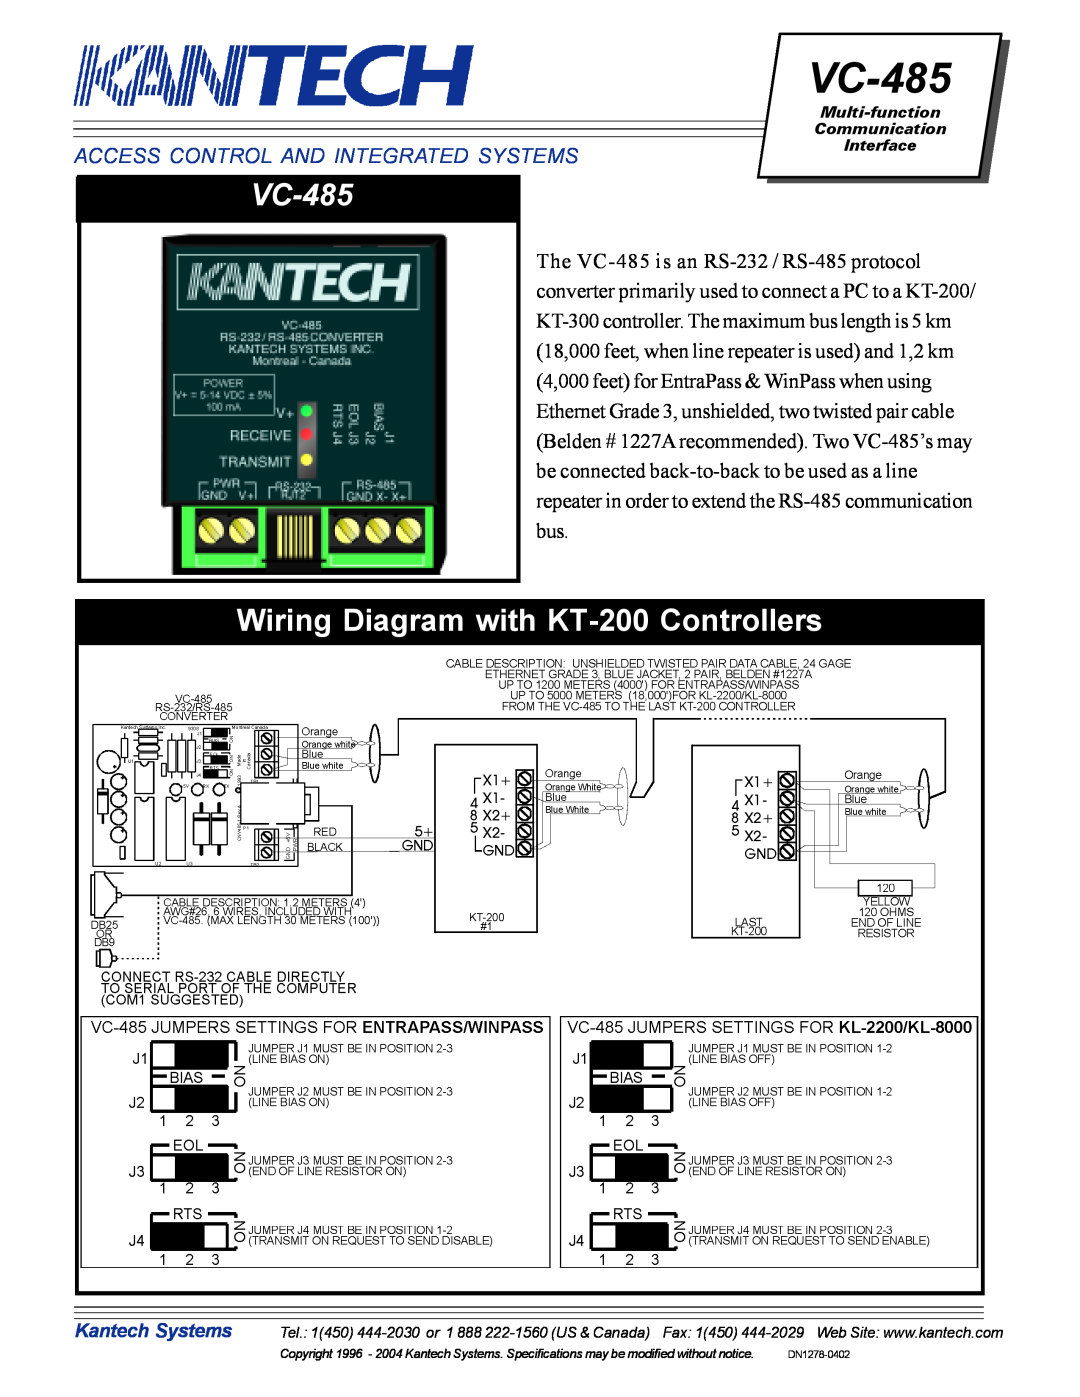 American Dynamics VC-485 specifications Wiring Diagram with KT-200 Controllers, Access Control And Integrated Systems 